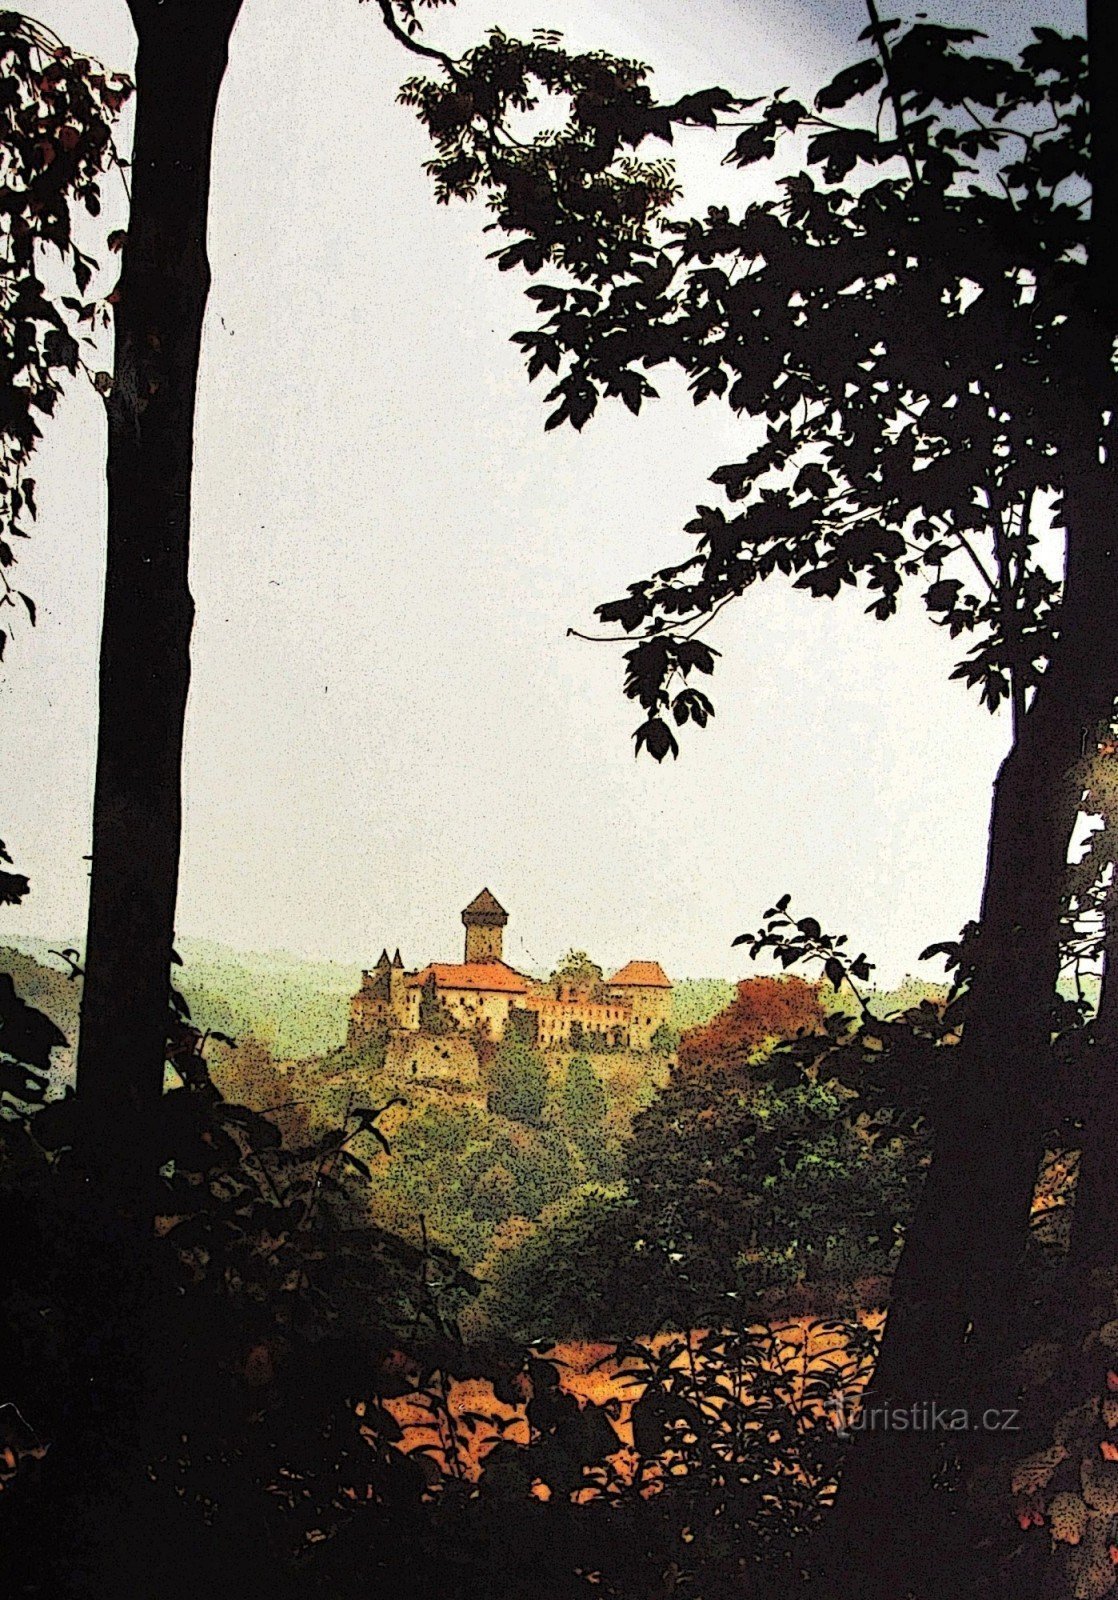 Sovinec castle from a distance